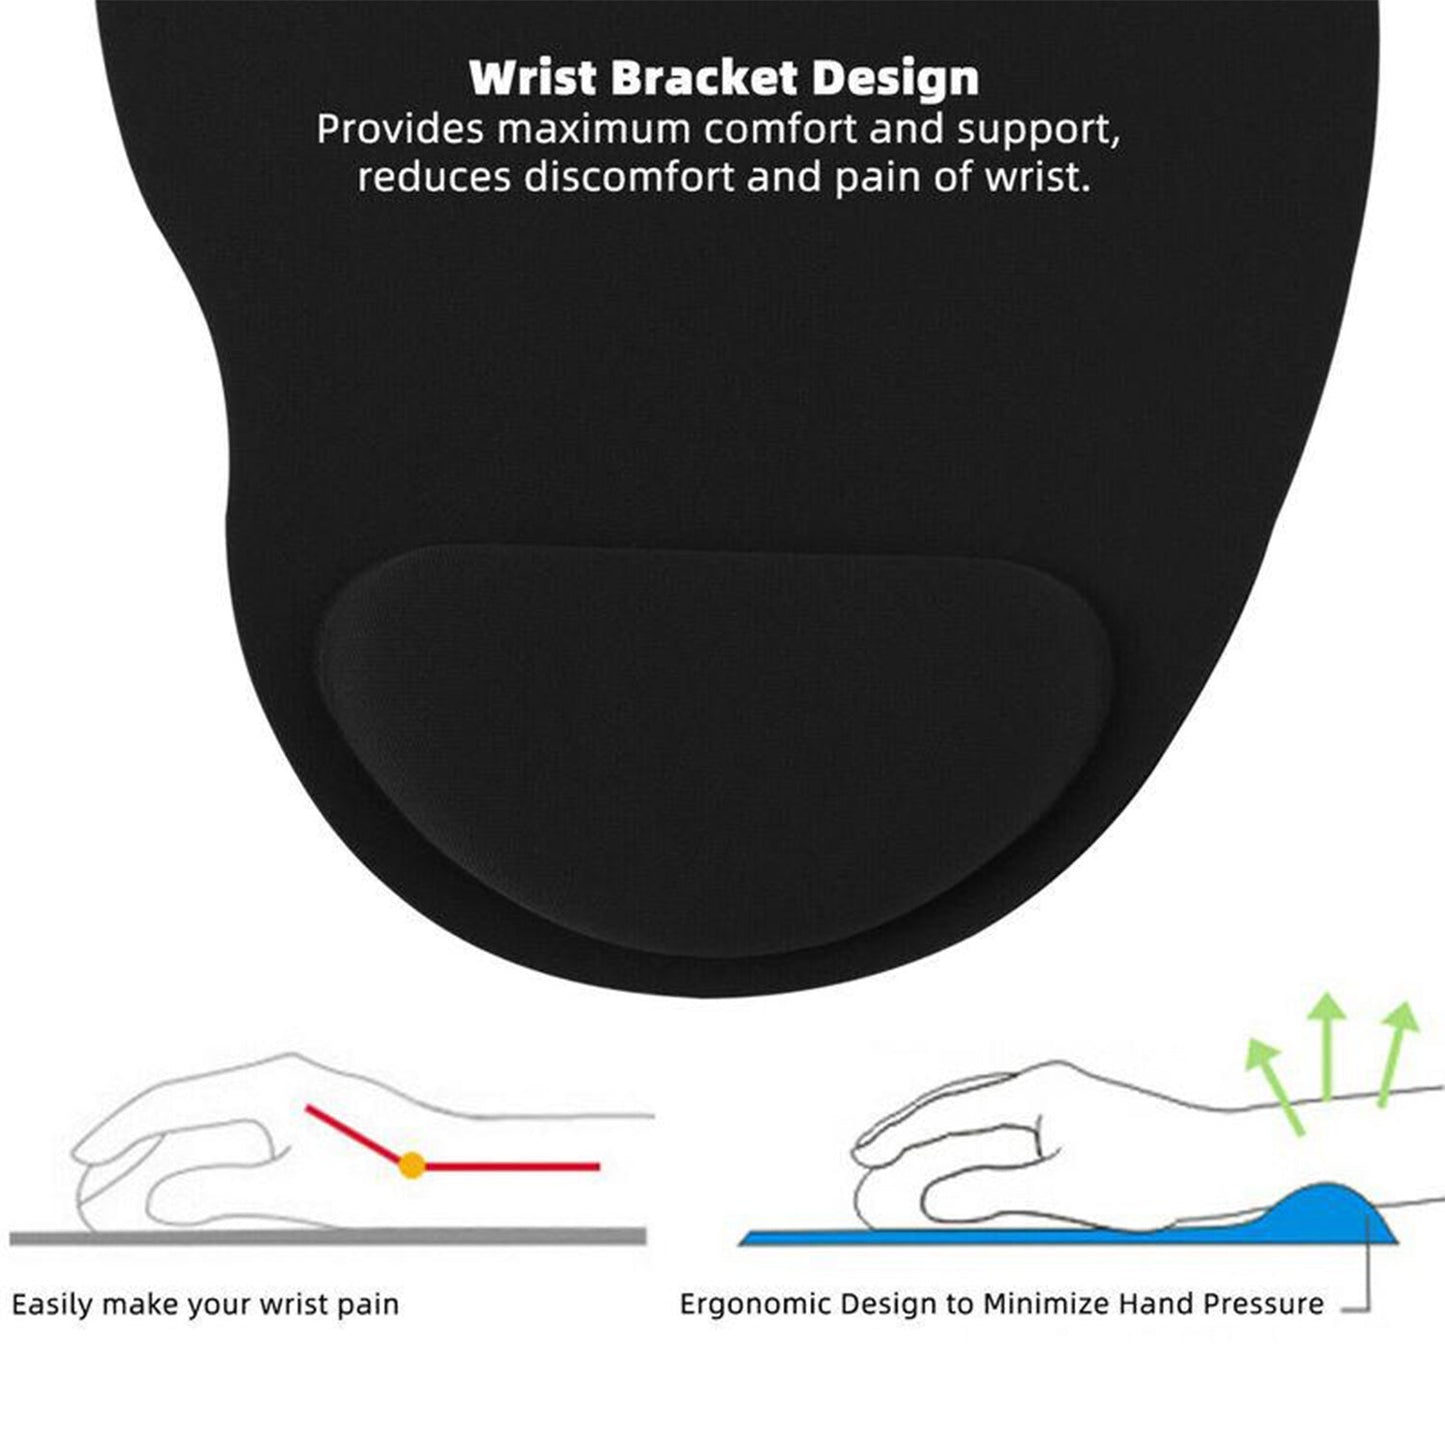 6161 Wrist S Mouse Pad Used For Mouse While Using Computer.